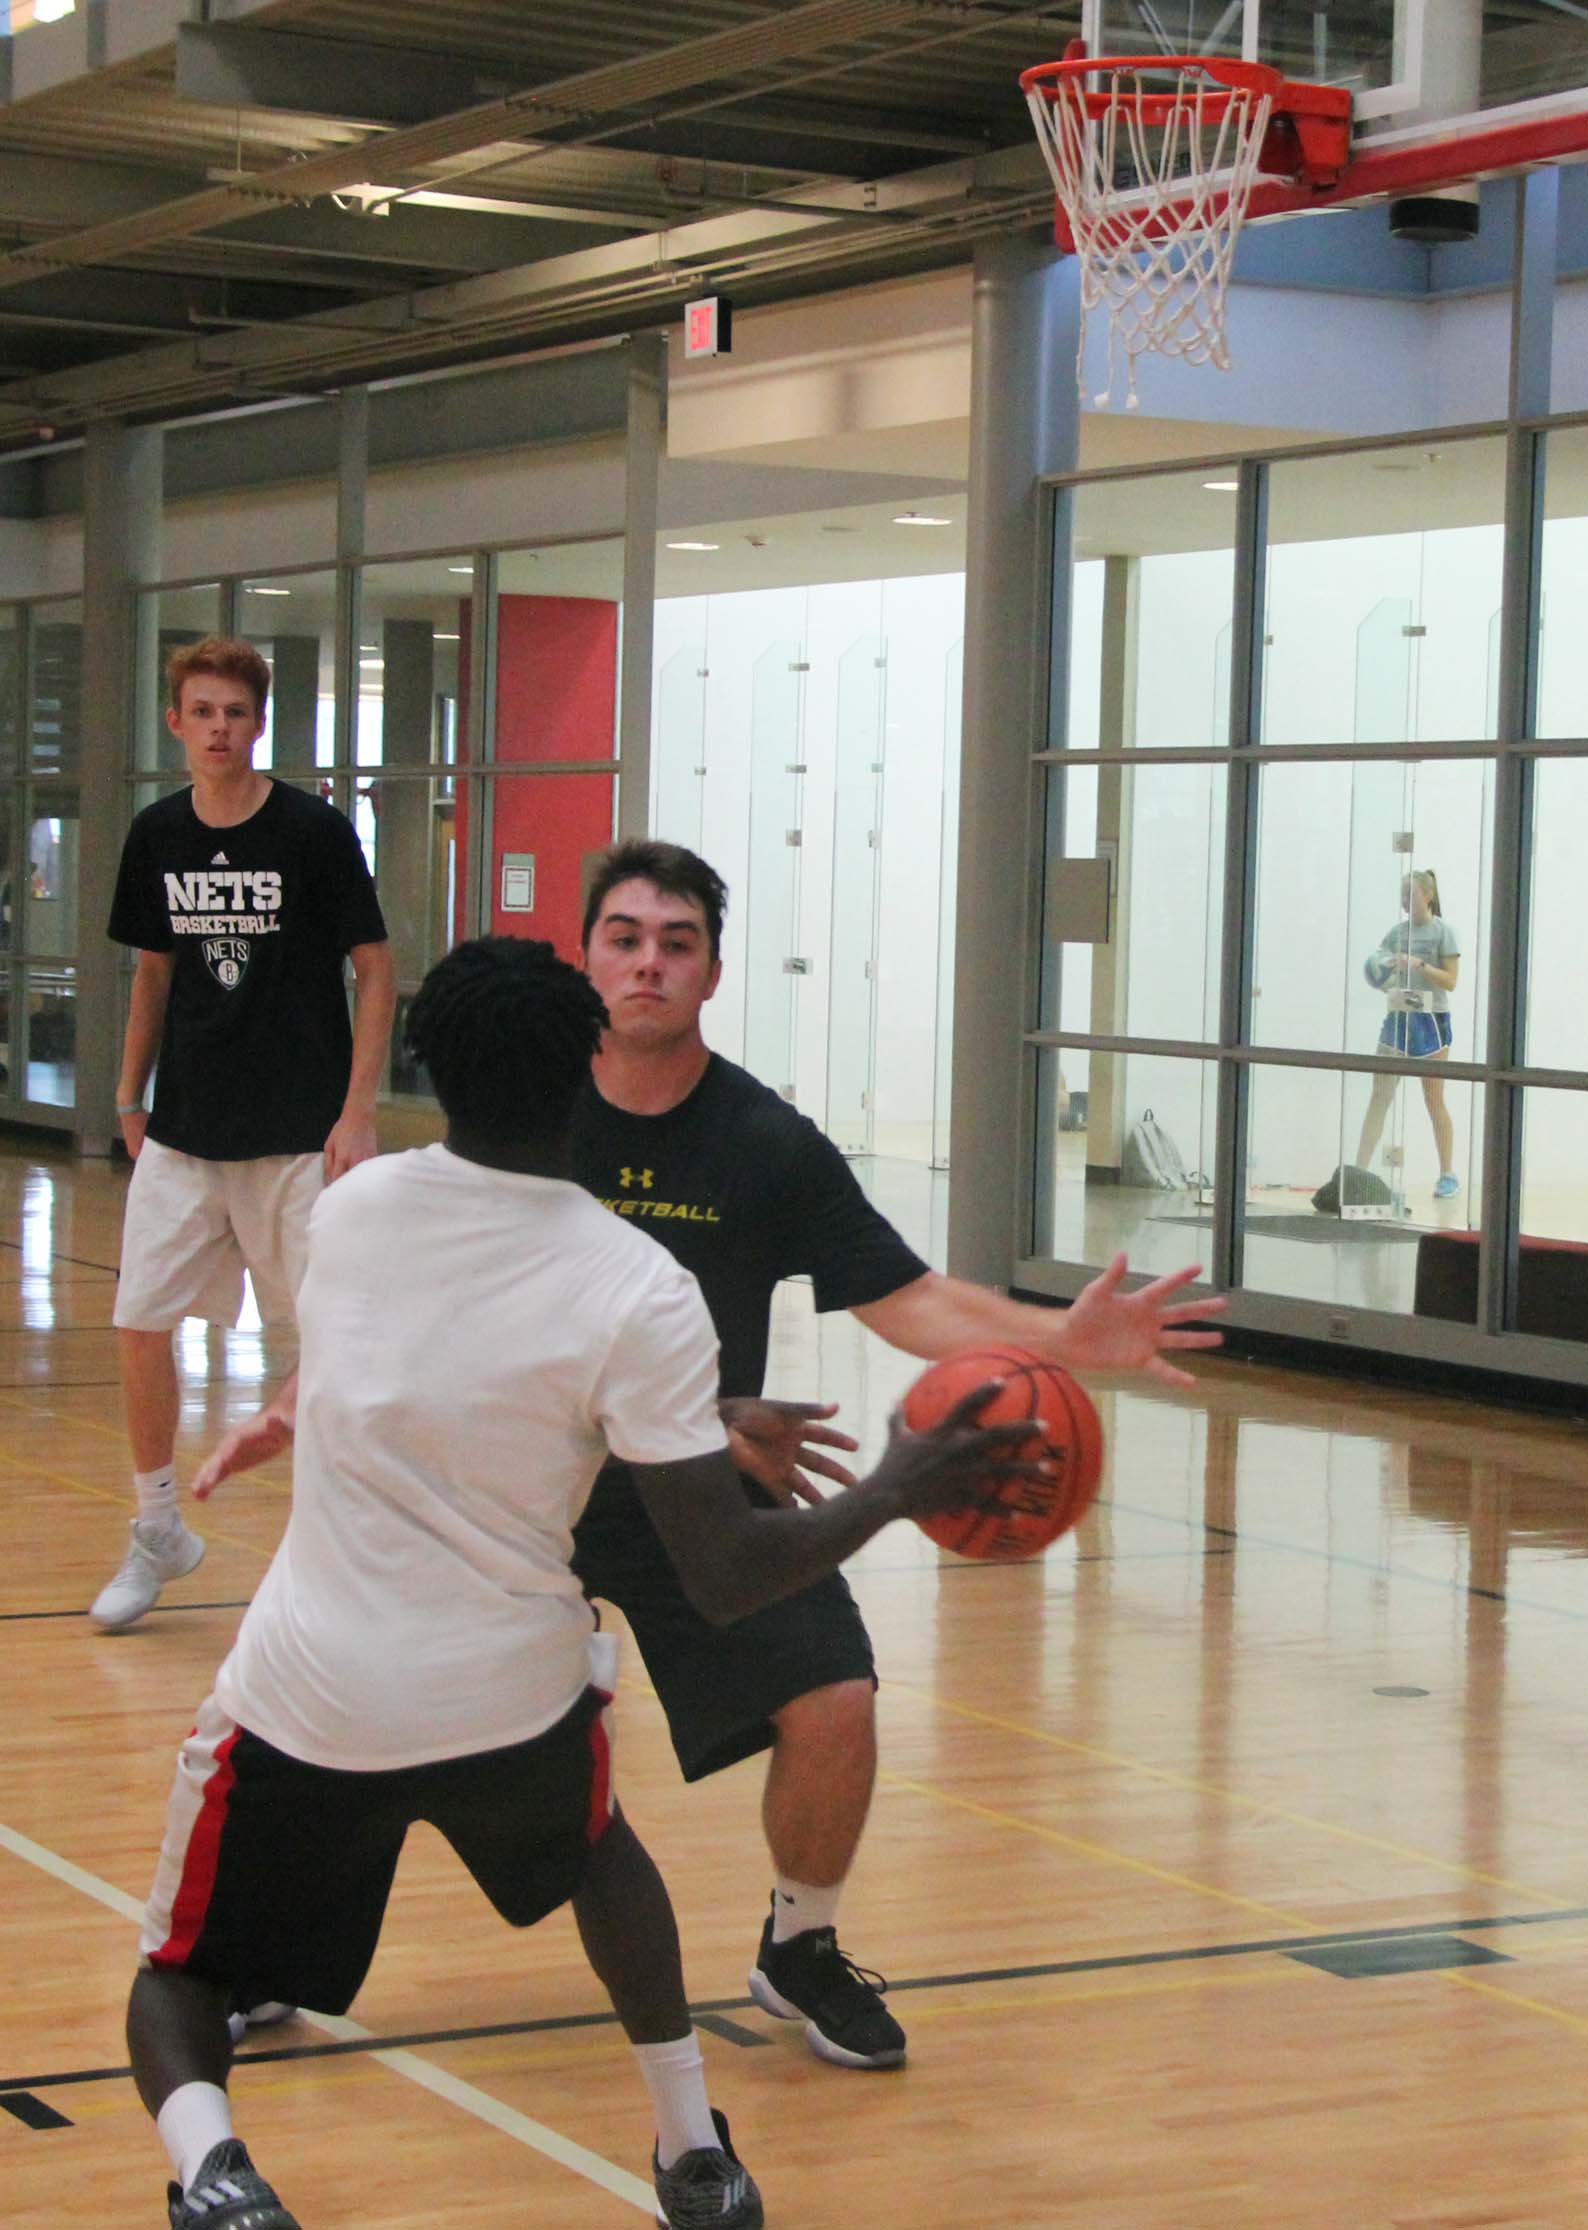 Intramural sport leagues expected to ‘max out’ this fall